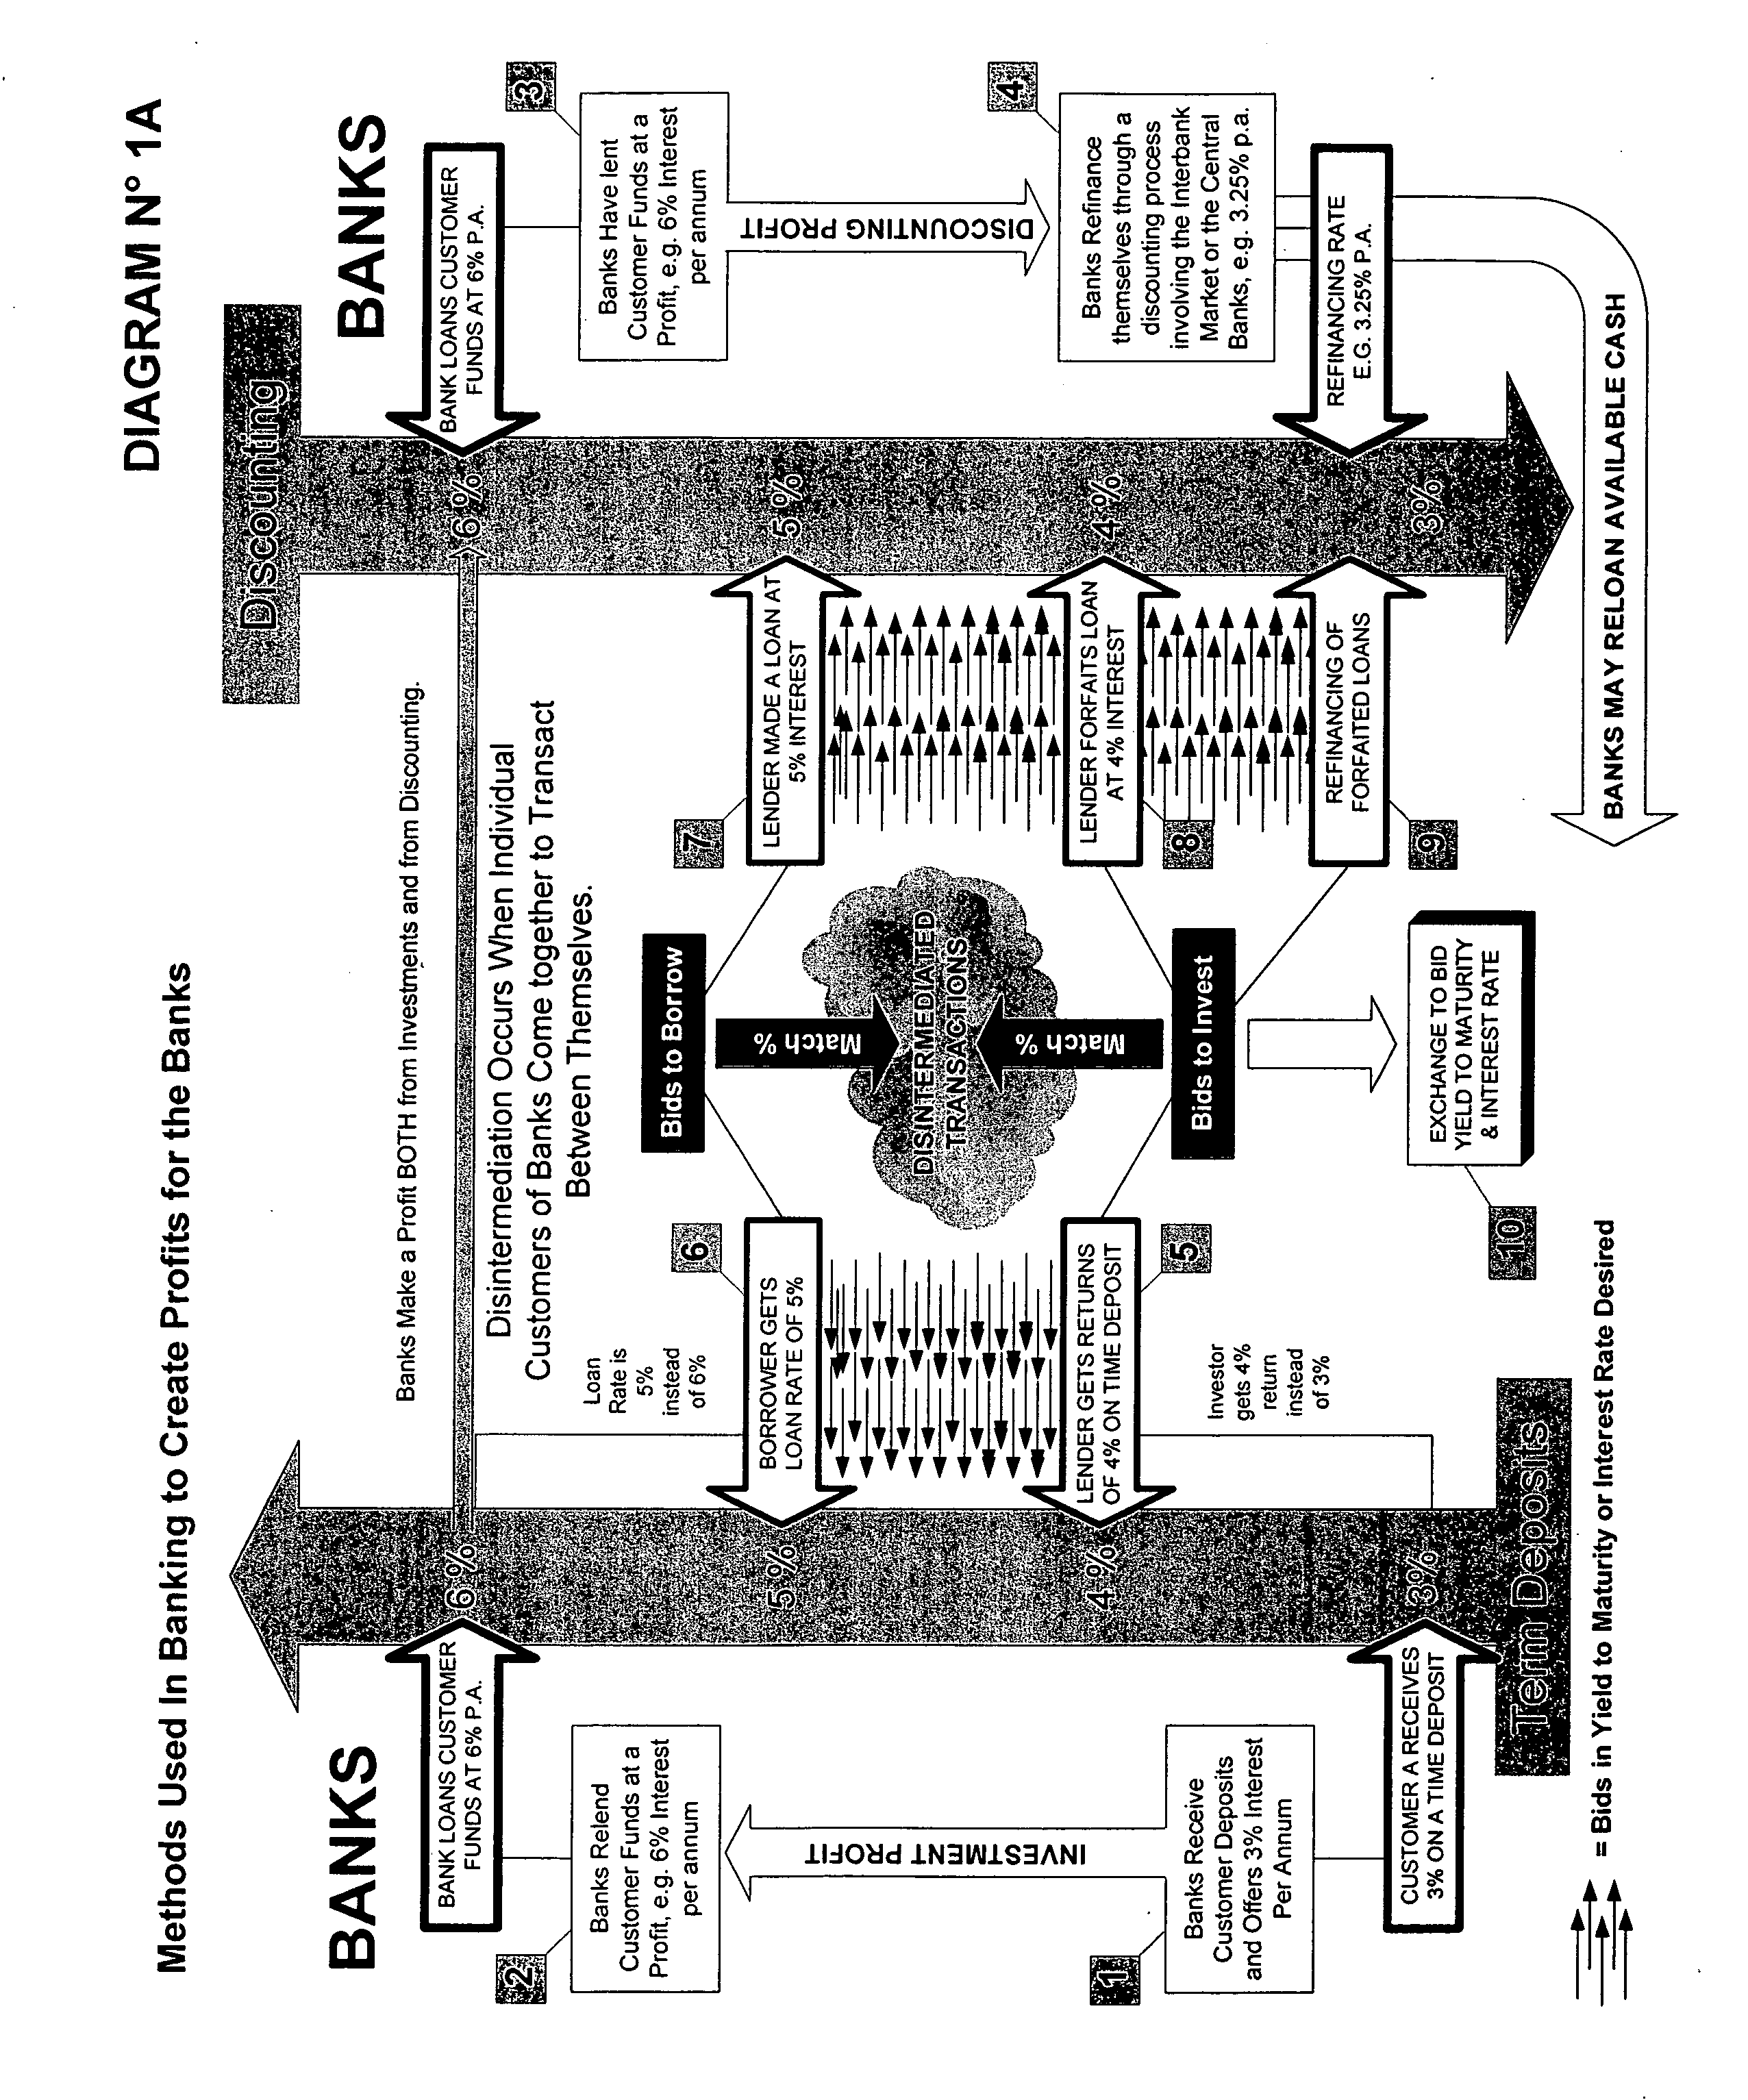 System & method for the creation of a global secure computerized electronic market-making exchange for currency yields arbitrage